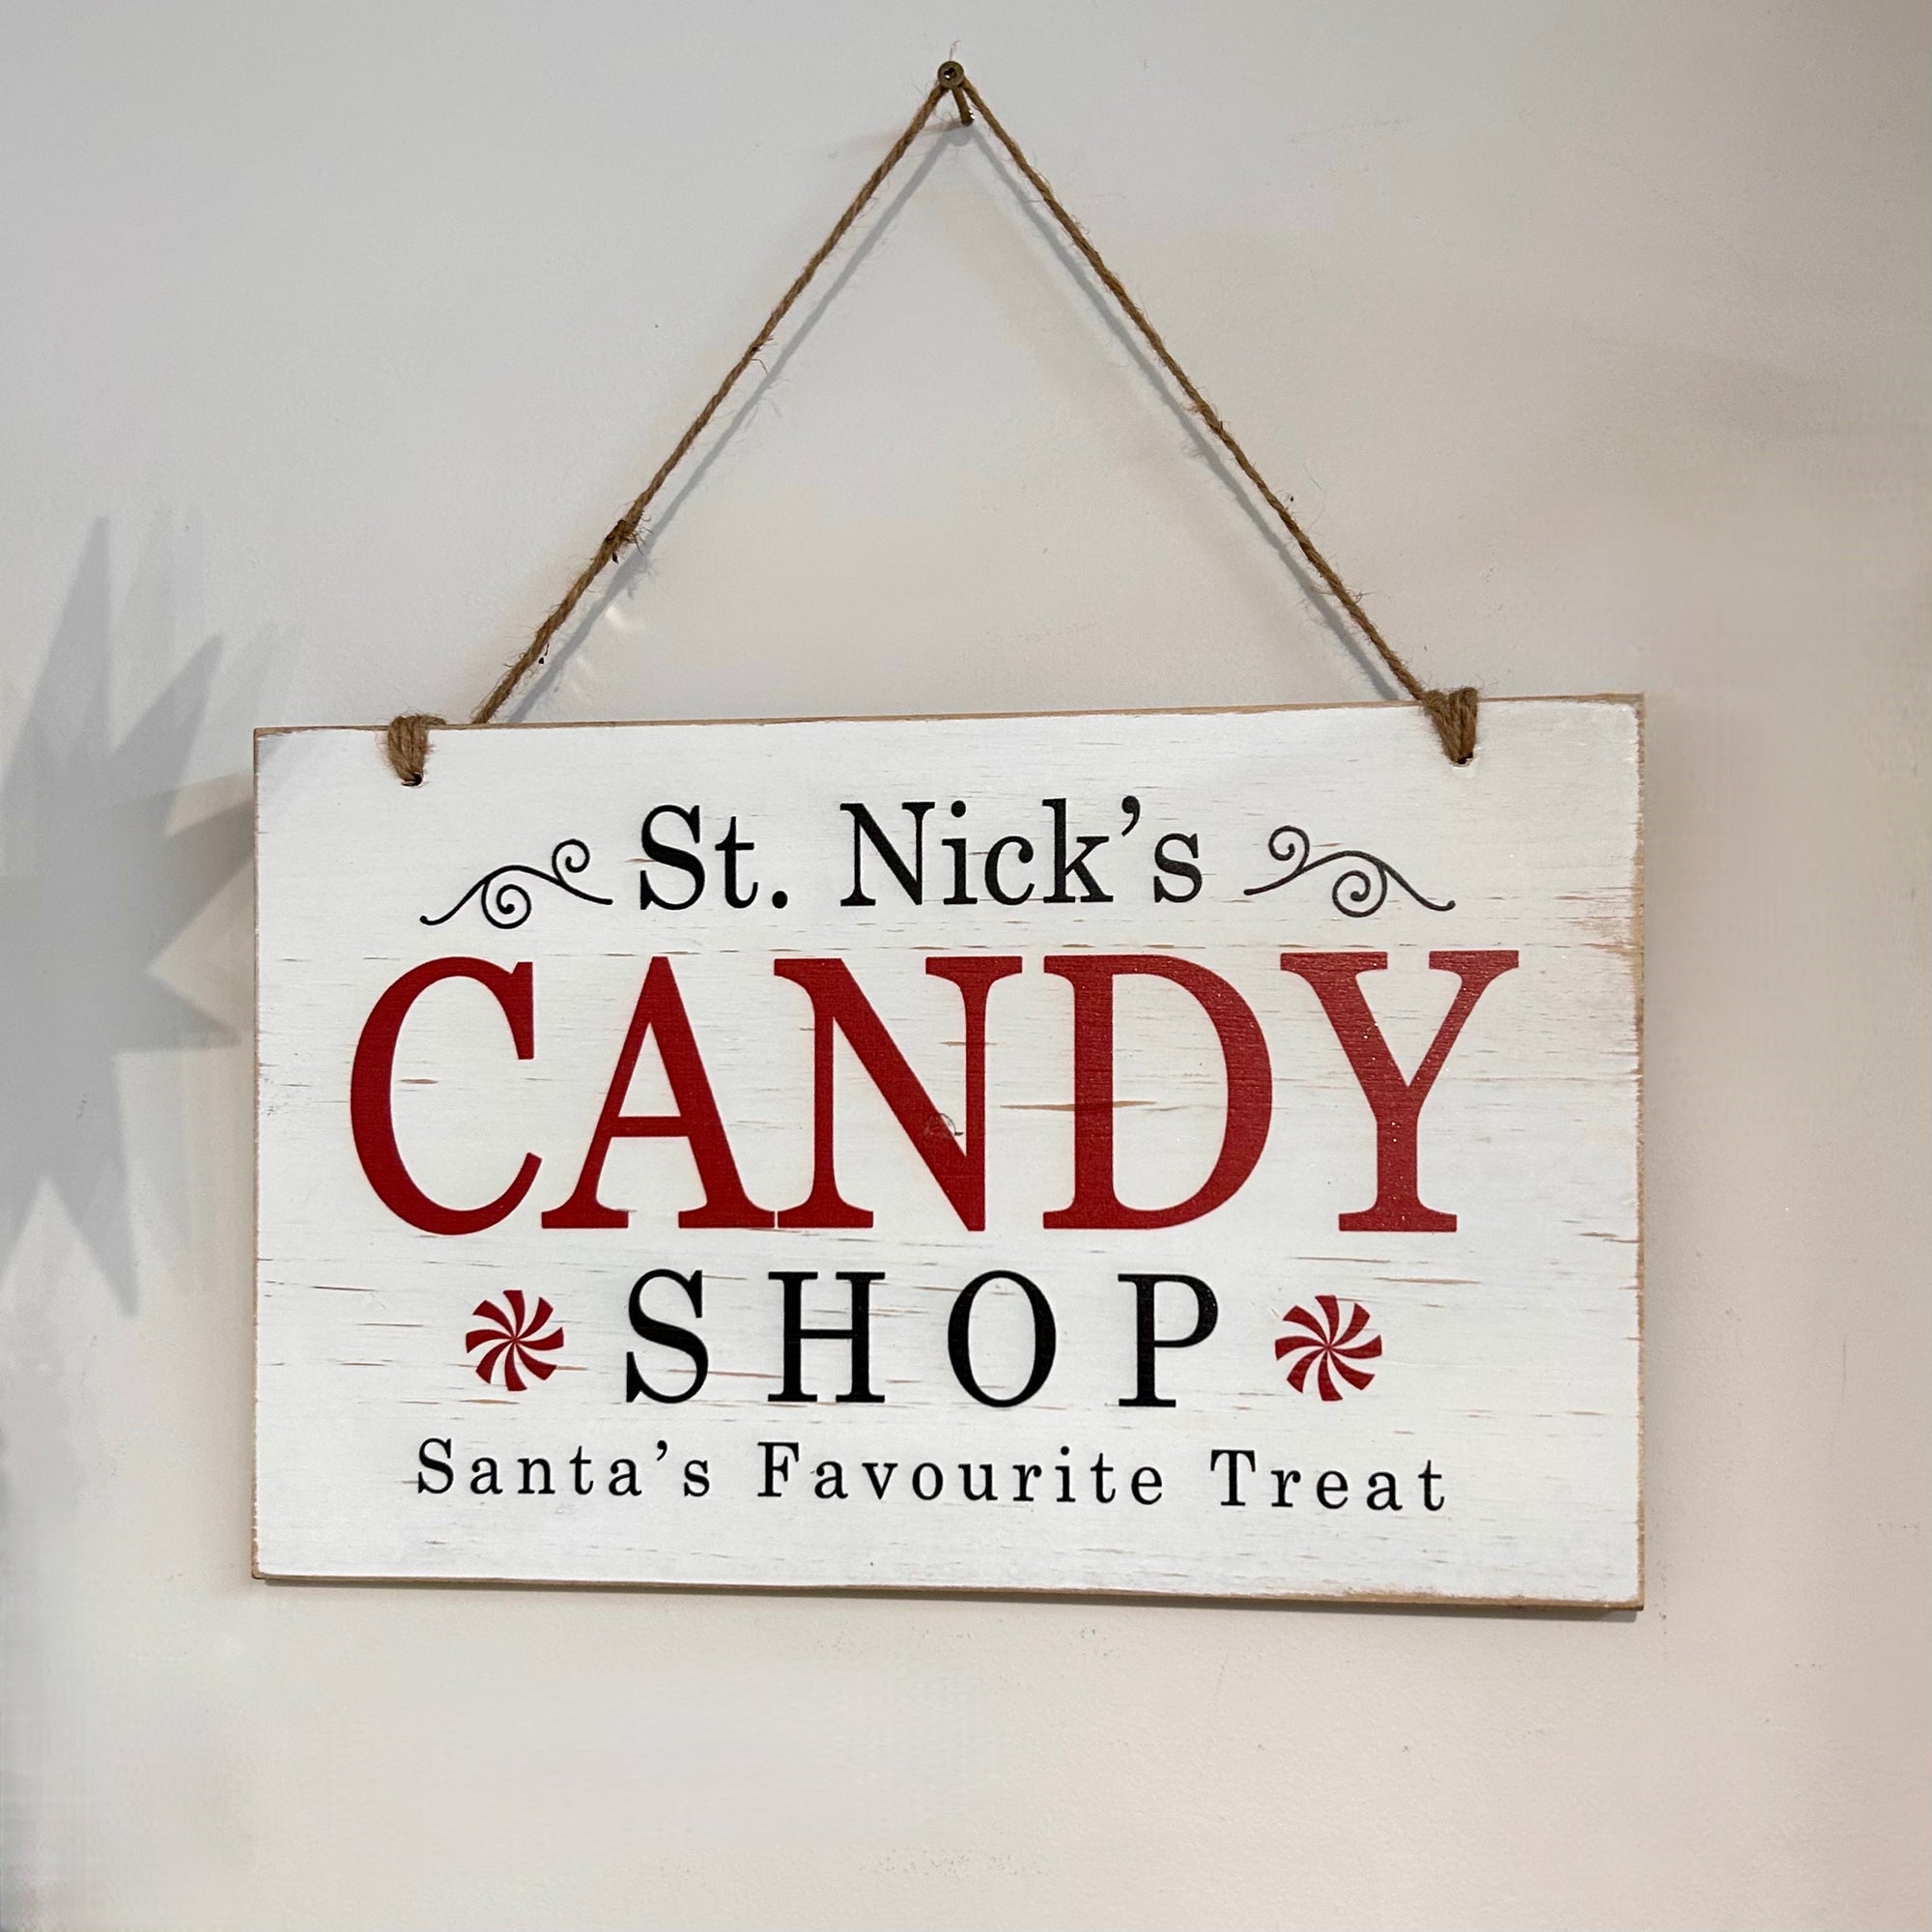 St. Nick's Candy Shop